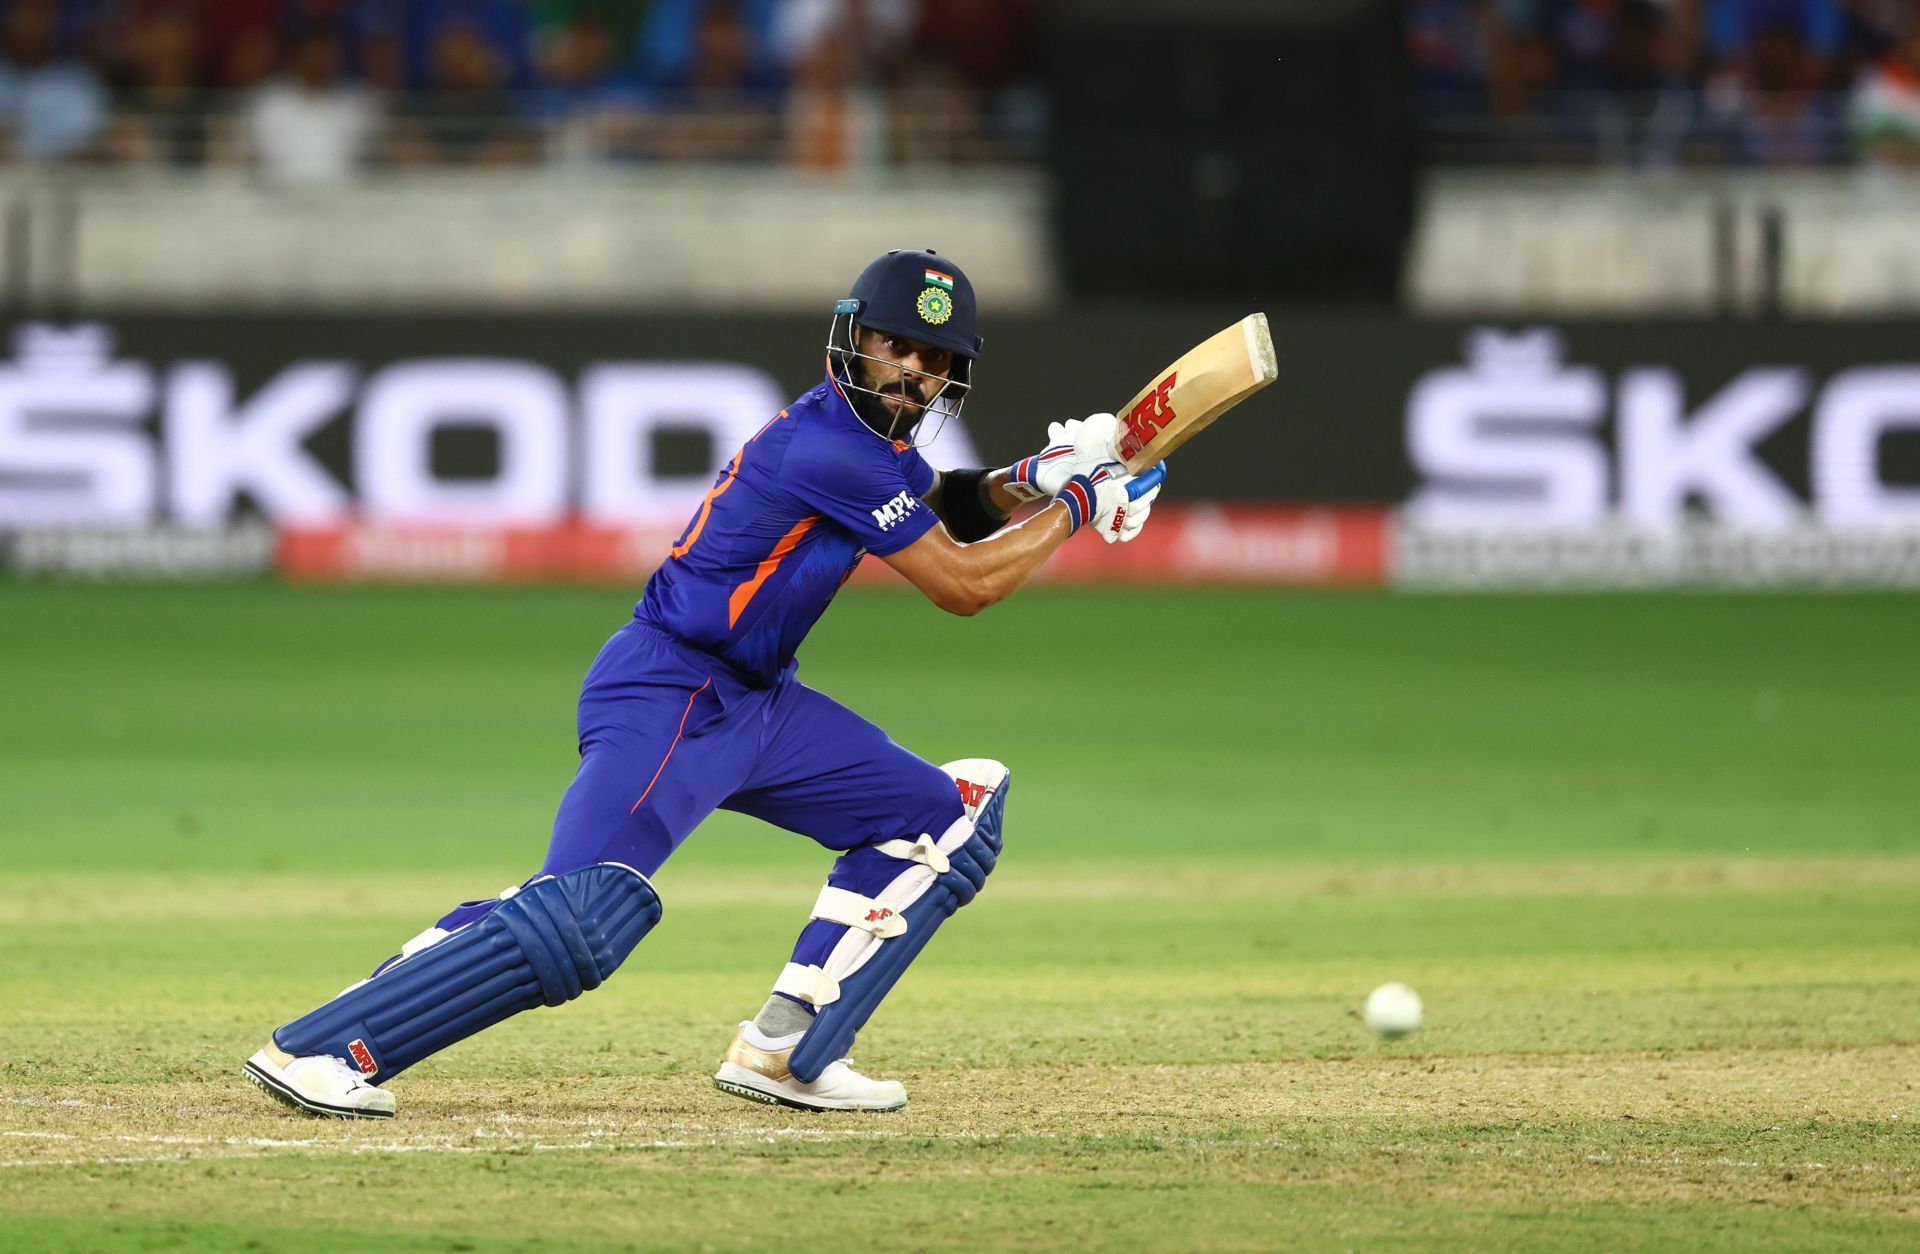 Despite ruling the one day format since his debut, a double hundred has eluded Kohli